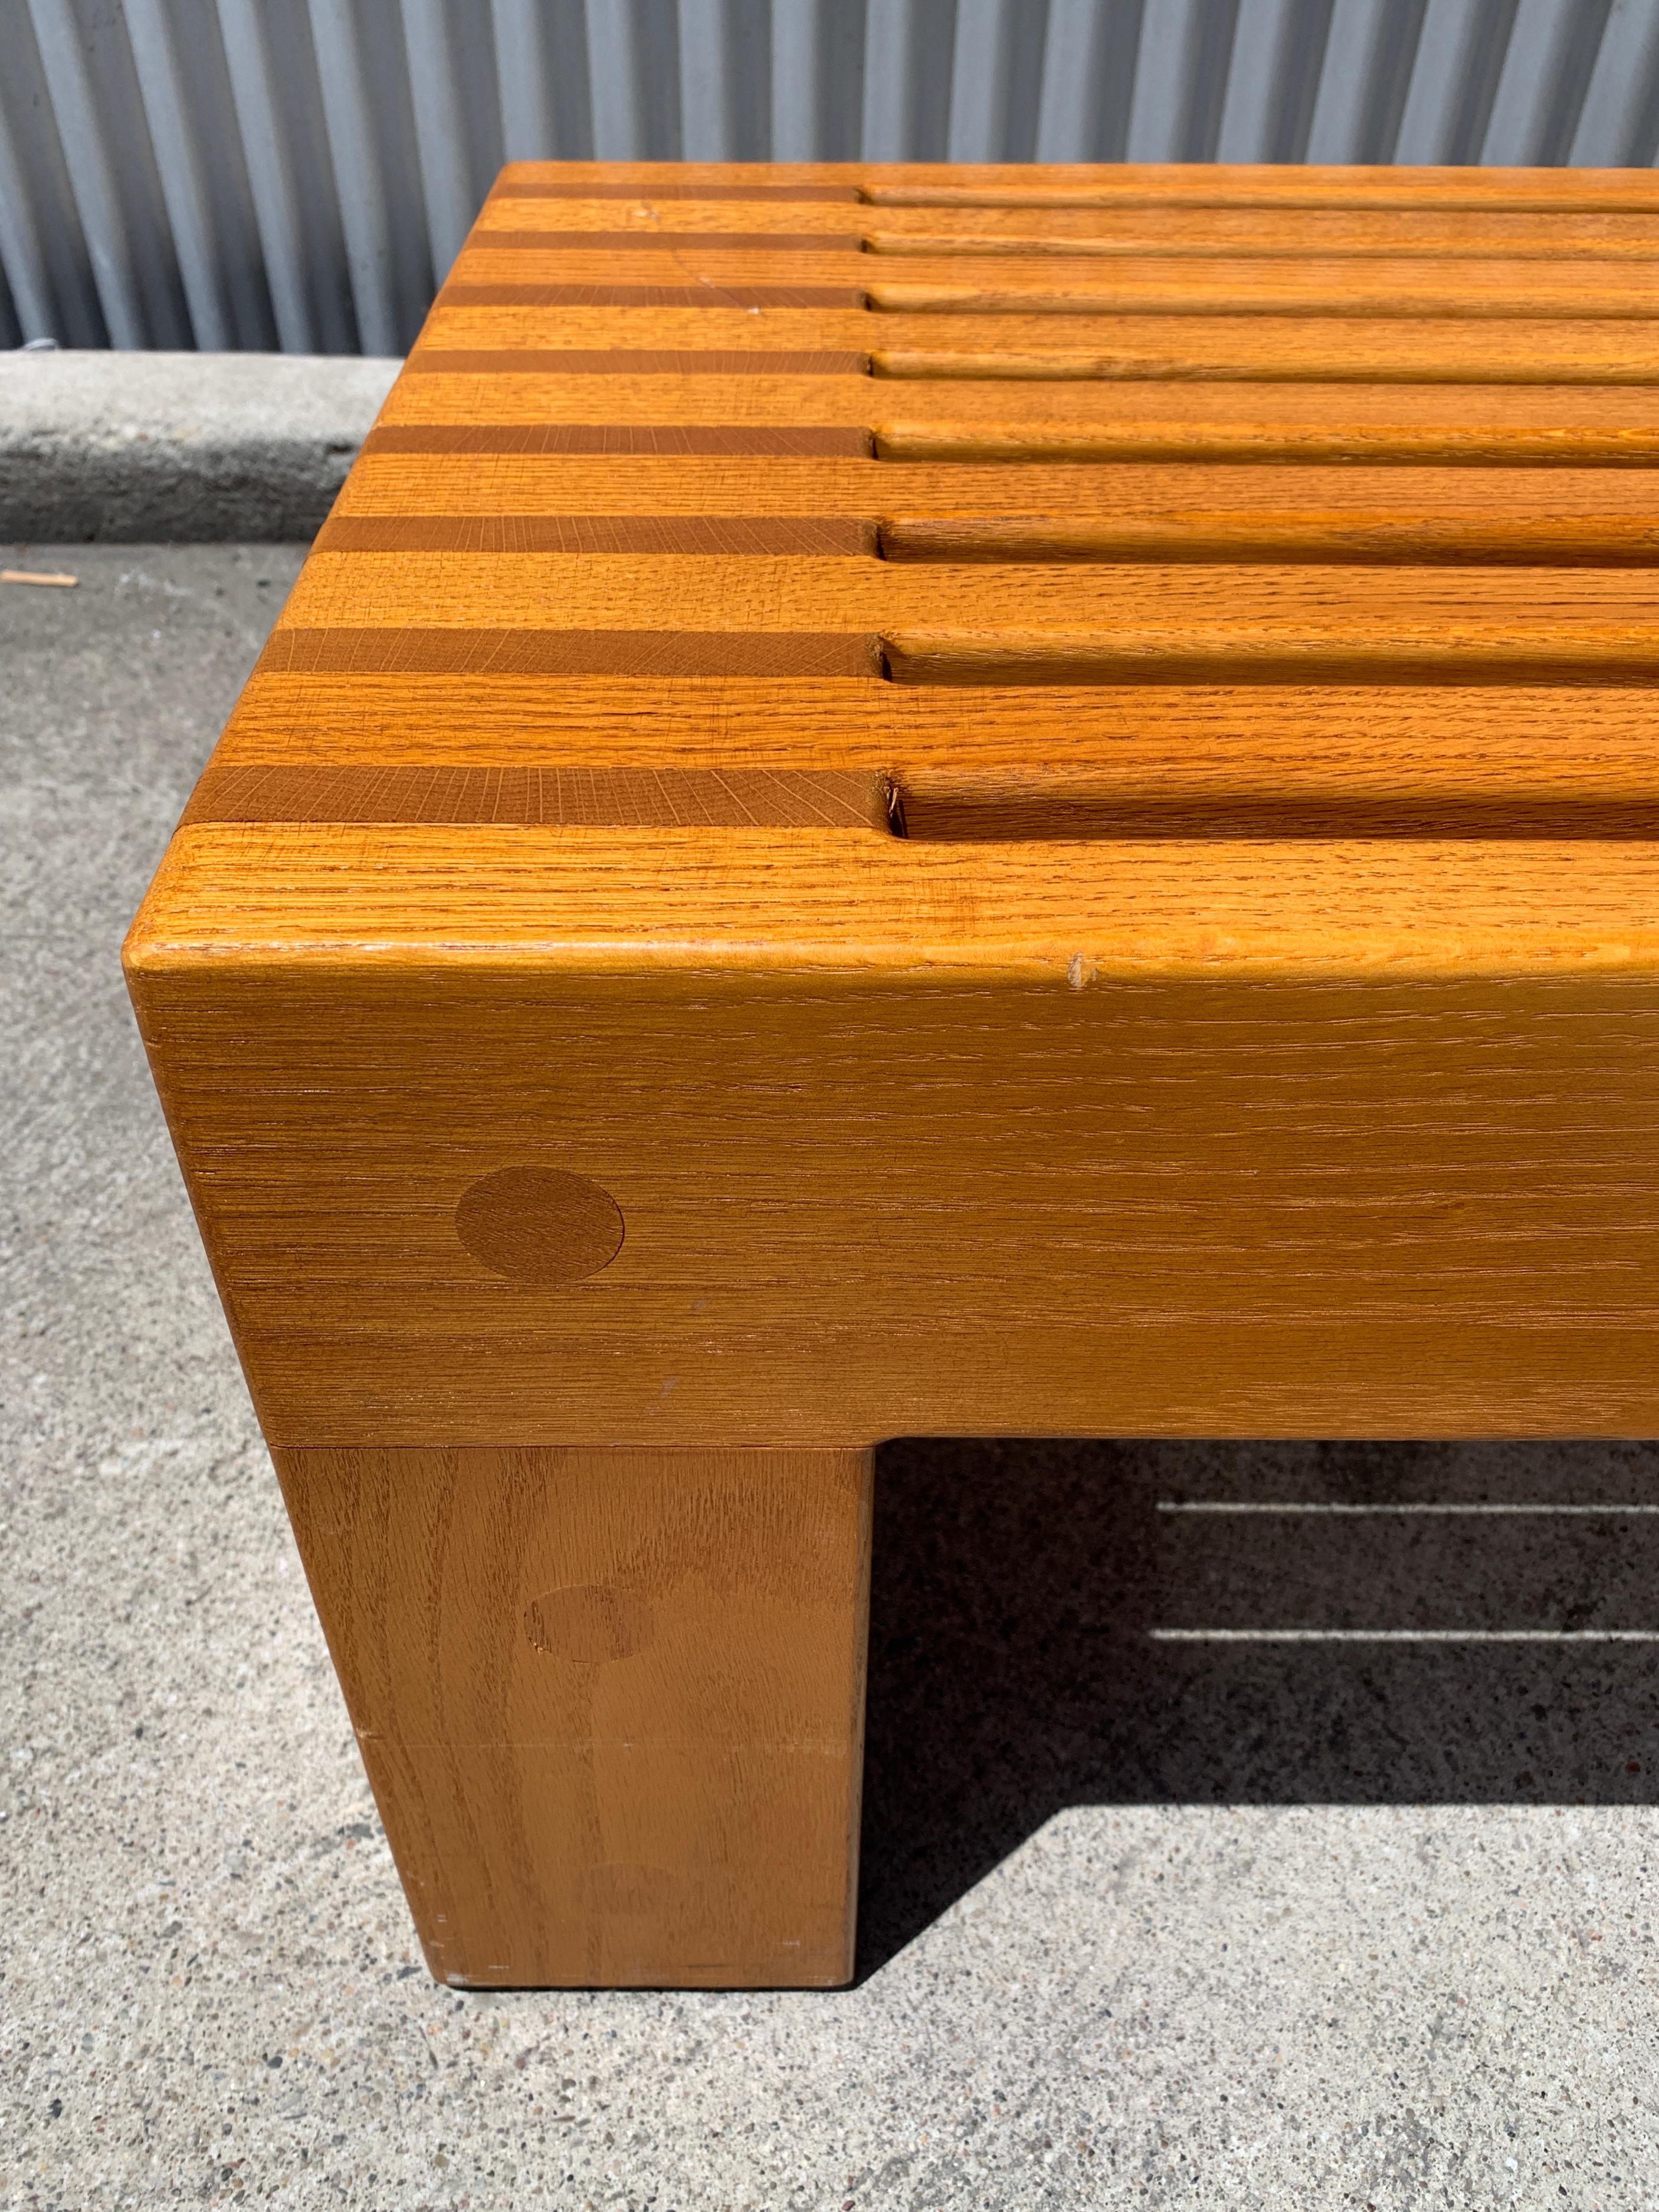 Custom Ricardo Legorretta white oak slat bench. Legorretta is well known for dozens of high profile private and municipal buildings and public spaces throughout the world. His distinctive shapes and bold colorful contrasts make powerful references